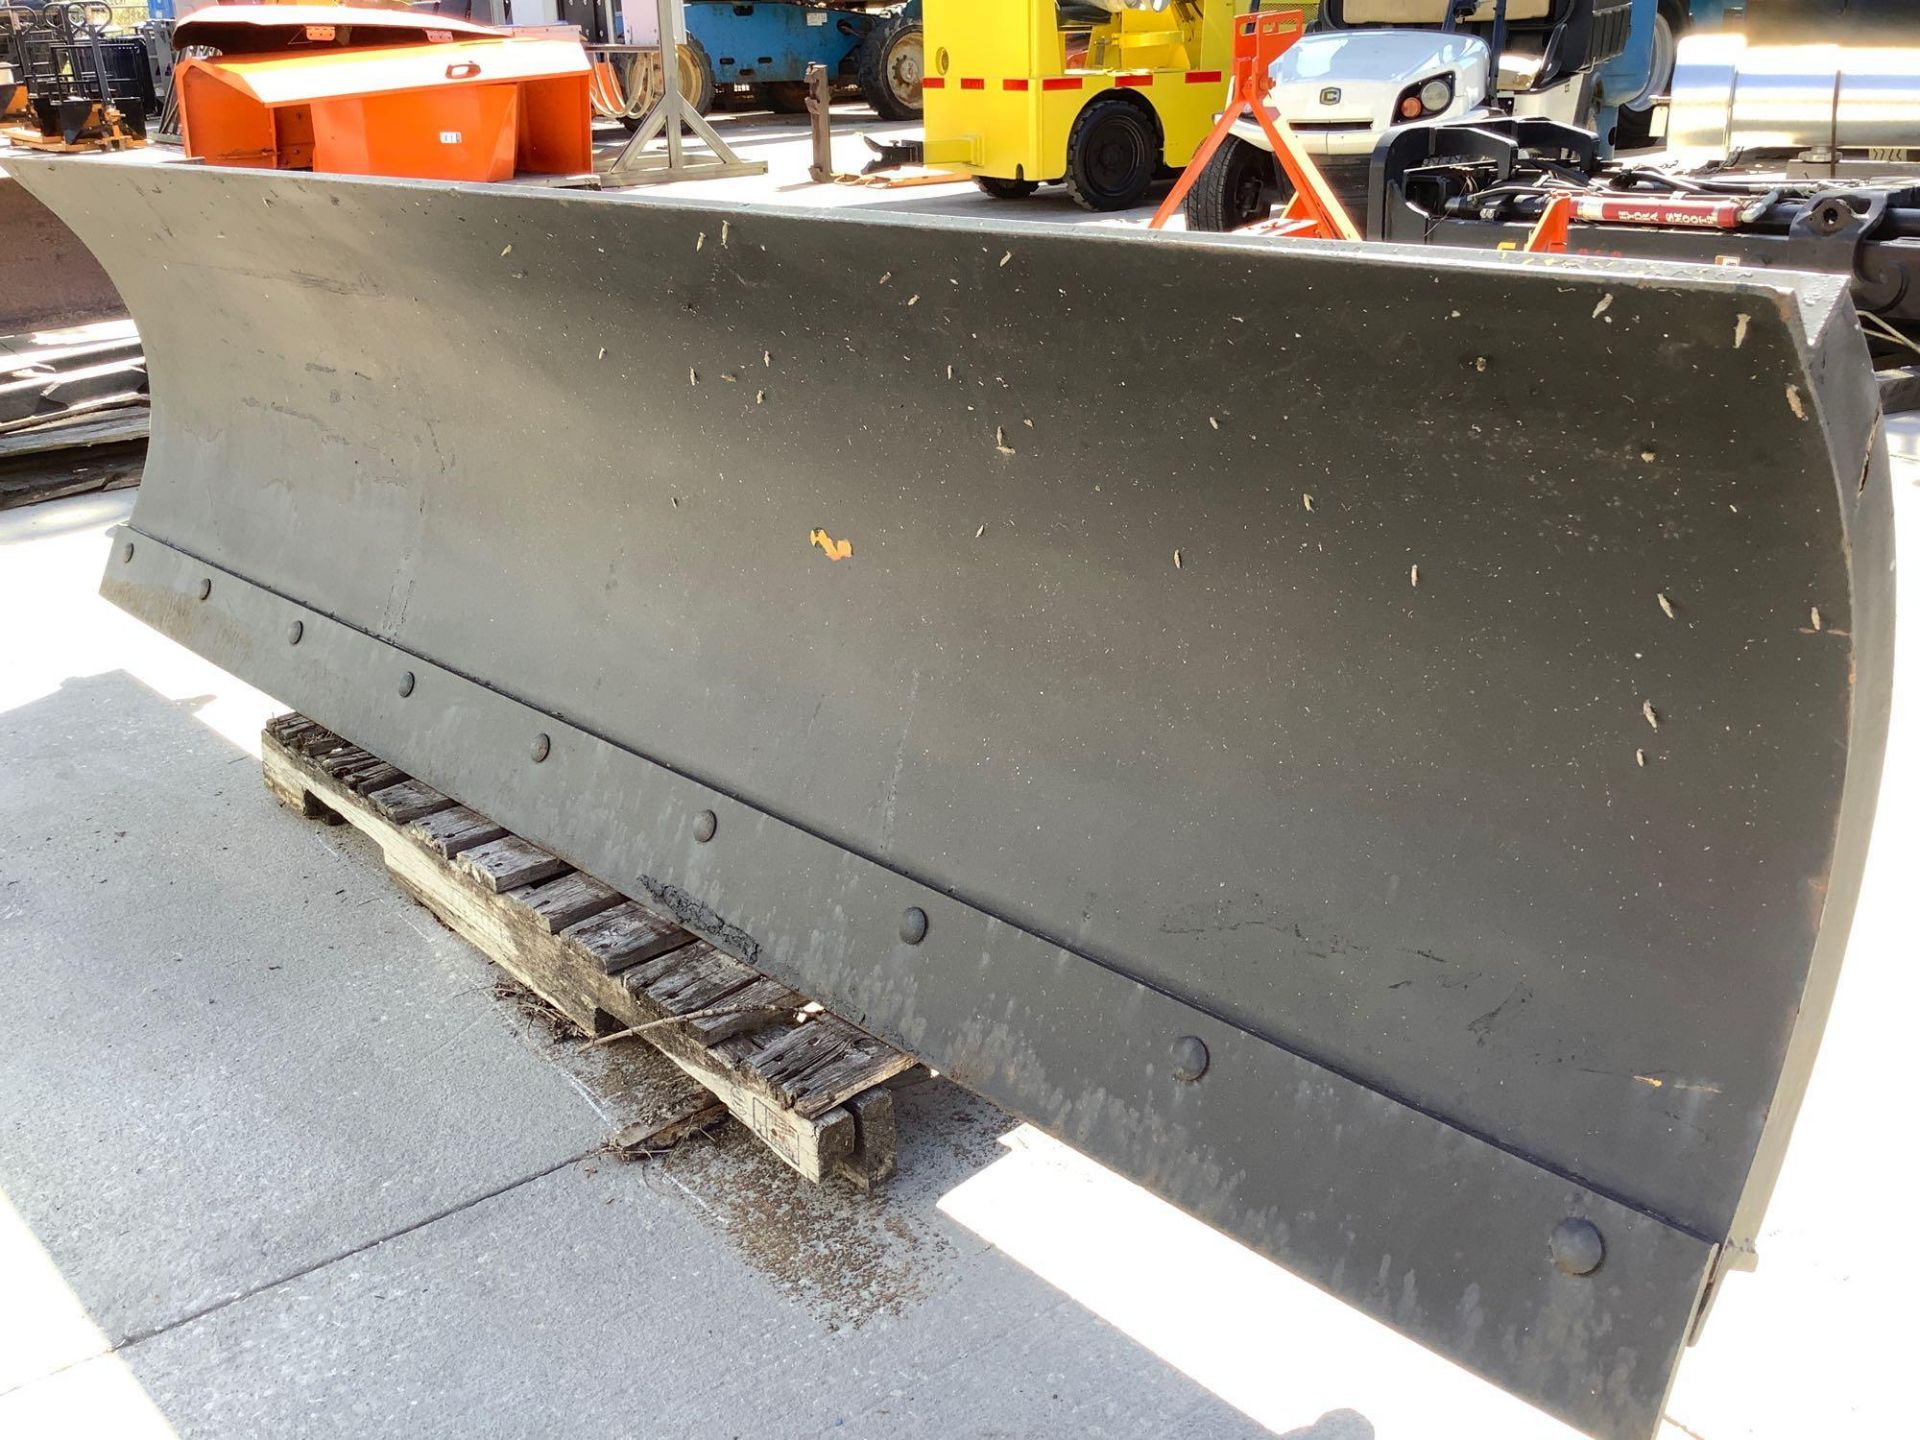 SKID STER PLOW ATTACHMENT APPROX 8FT LONG 2FT WIDE - Image 4 of 6